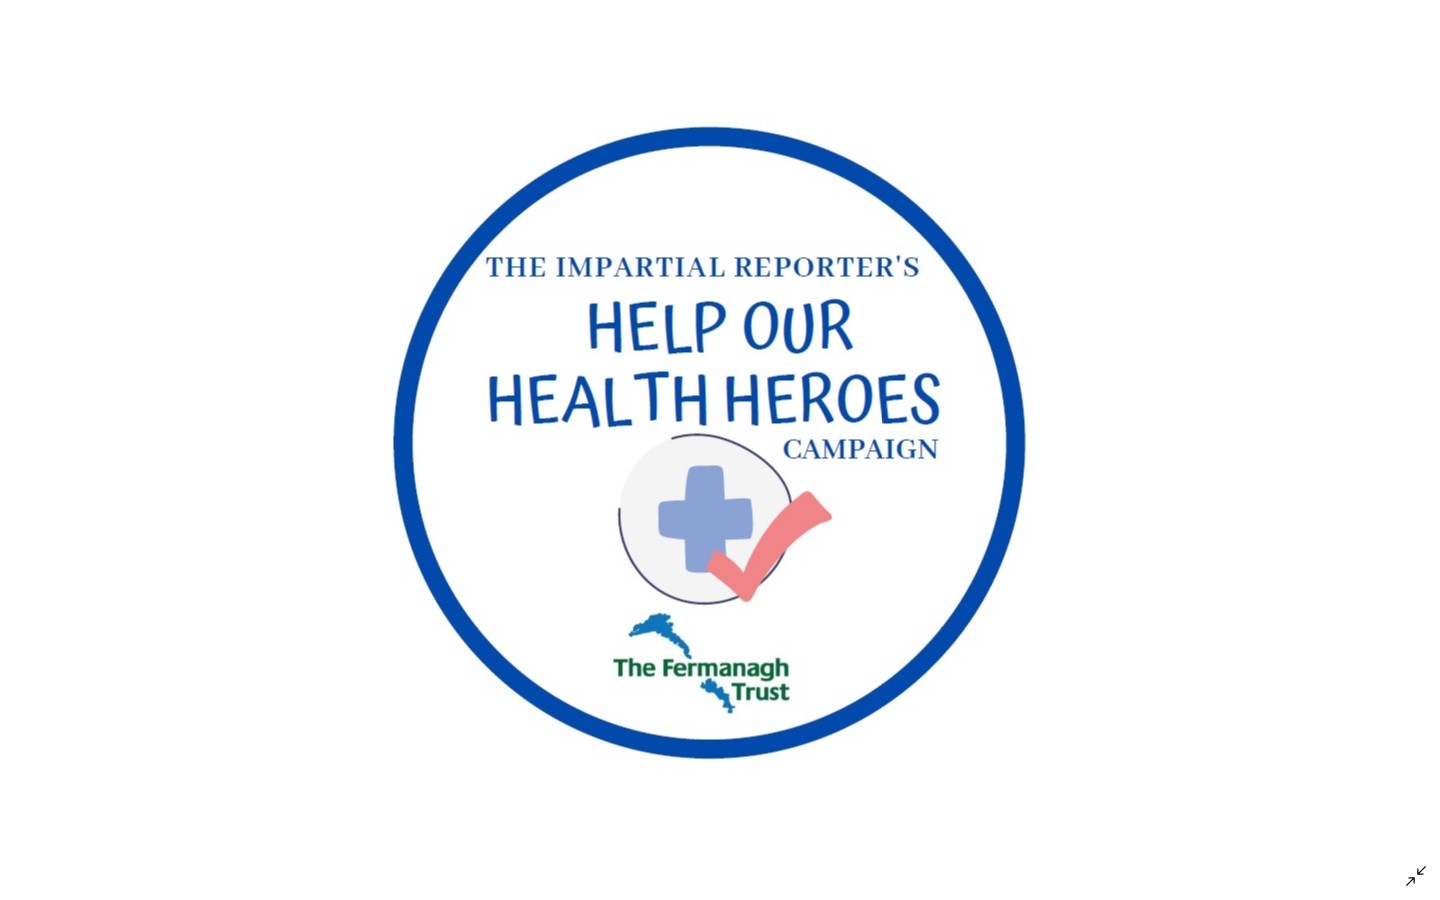 <h2 class=\"met_title_stack\">Help Our Health Heroes</h2> <br> <p>The Fermanagh Trust has teamed up with the Impartial Reporter to raise much needed resources to ‘Help Our Health Heroes’ in the ongoing fight against the coronavirus </p> <br>